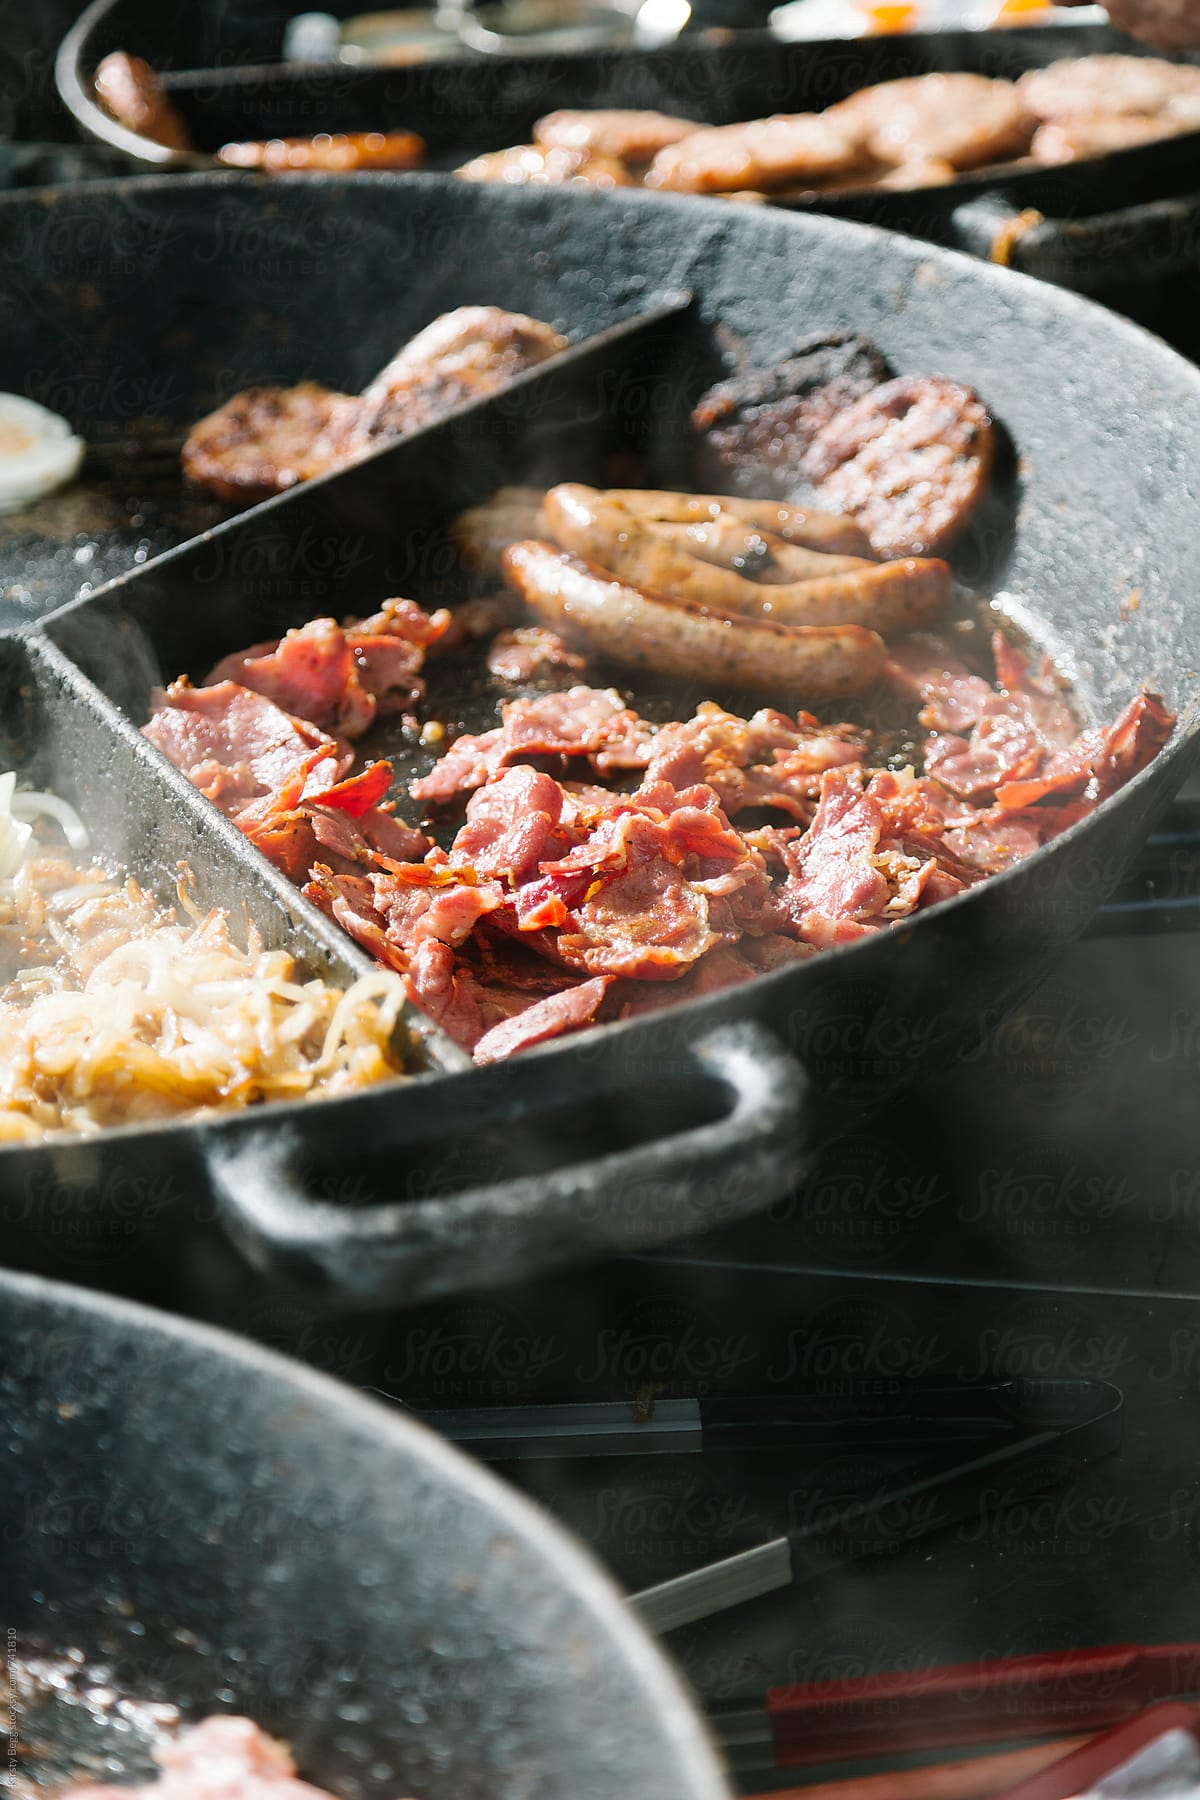 Bacaon, sausages, burgers and onion frying at market stall